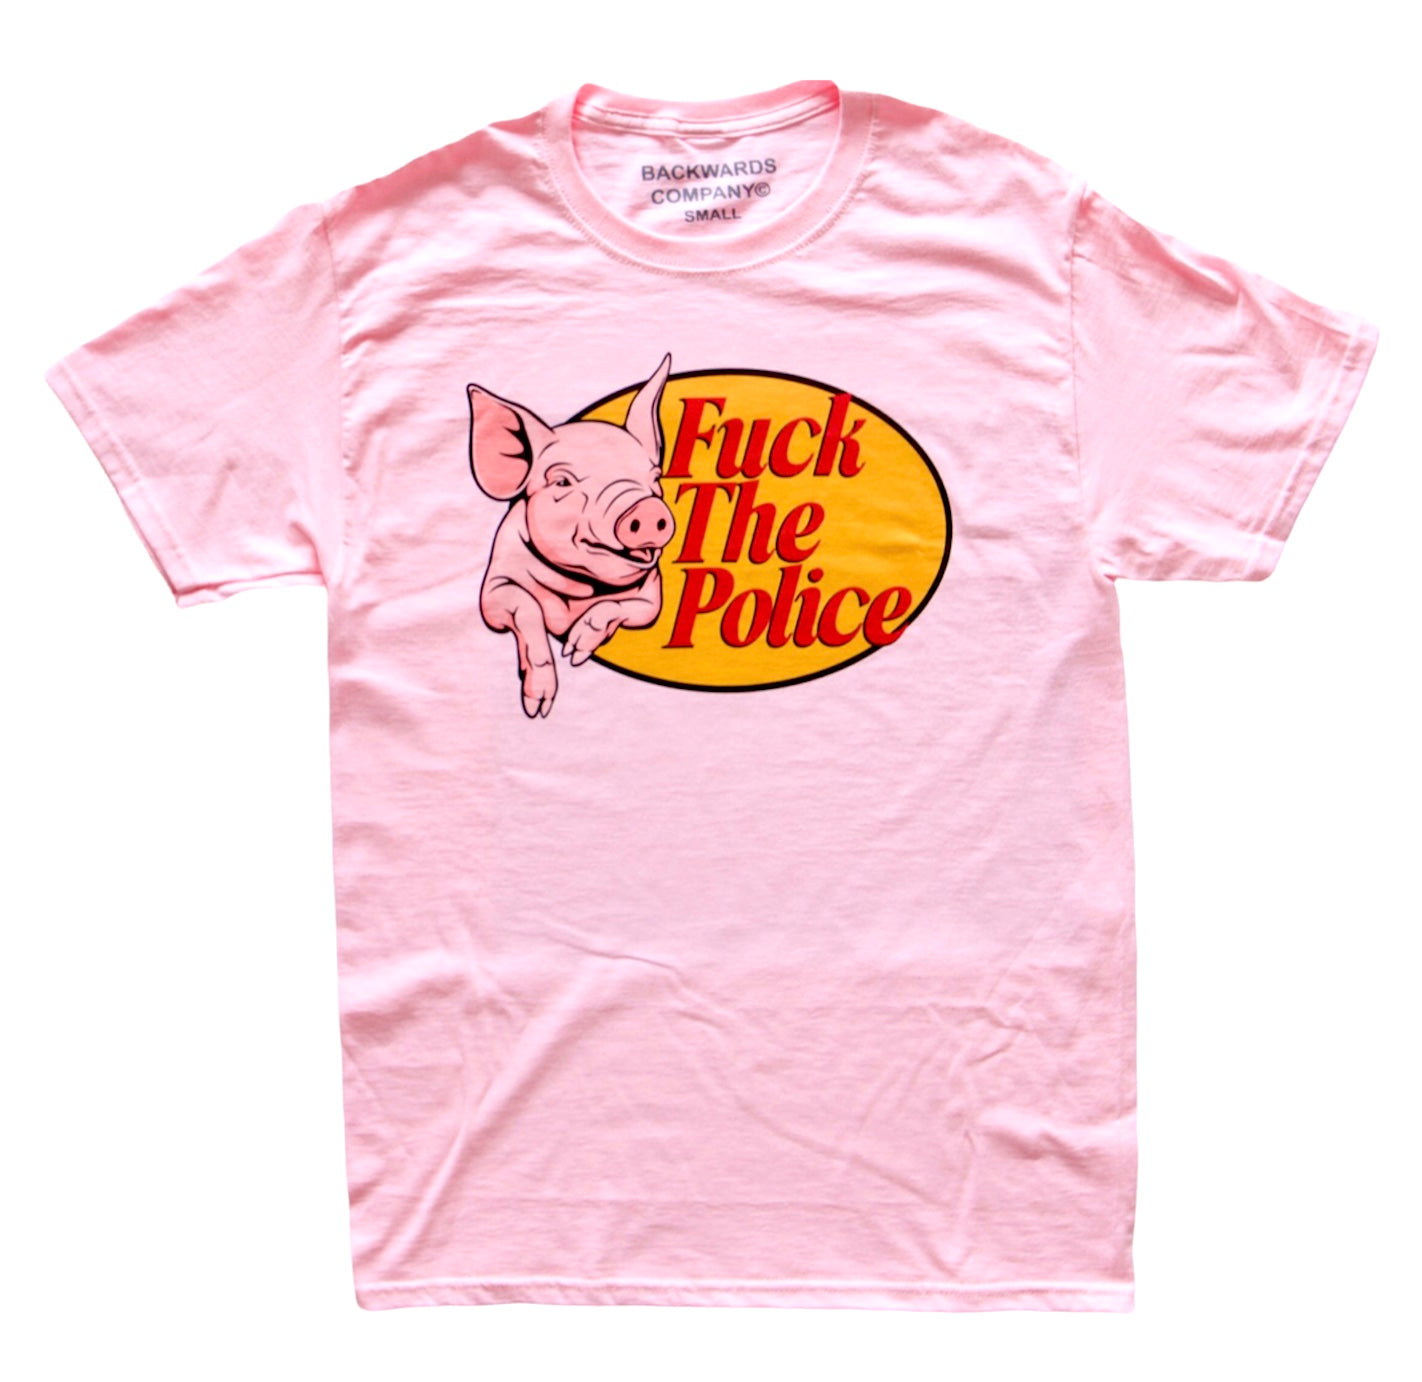 Light Pink “Fuck The Police” T-Shirt